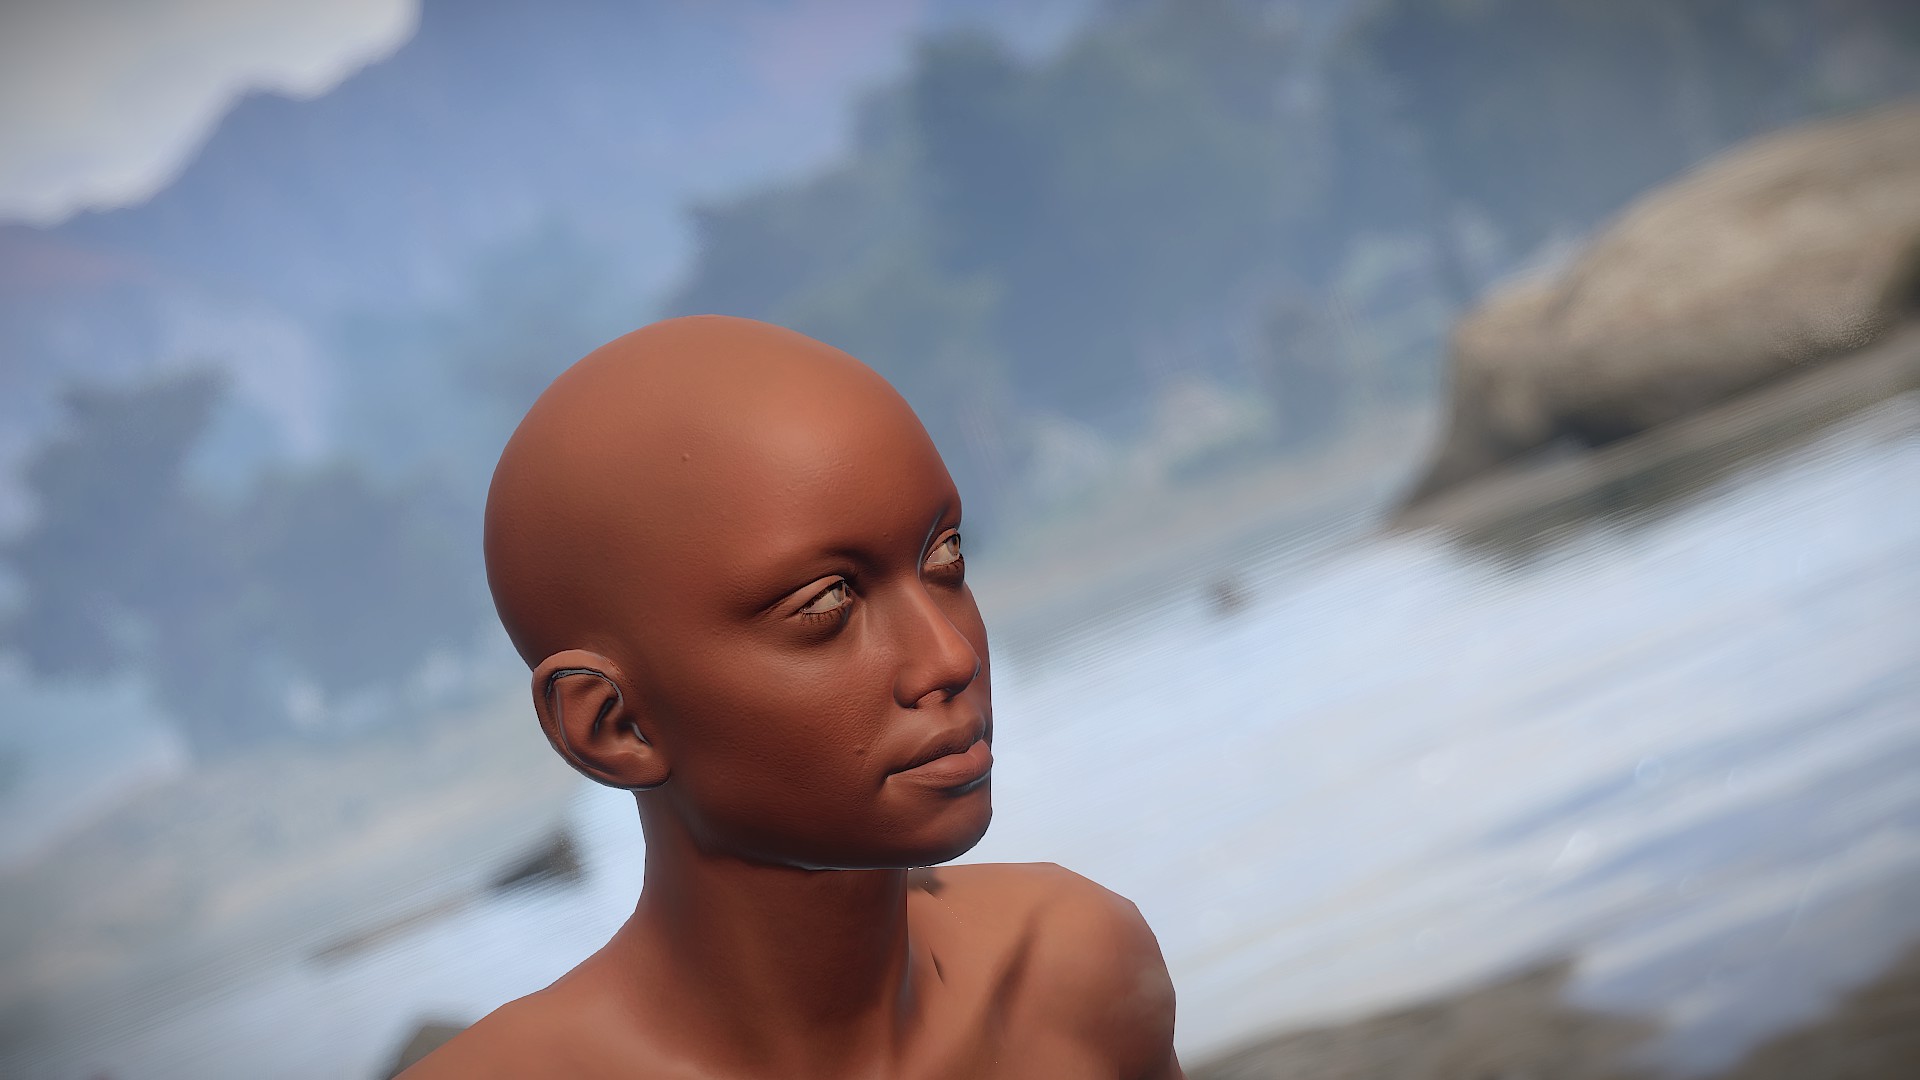 Sales skyrocketed after &#039;Rust&#039; added female character models